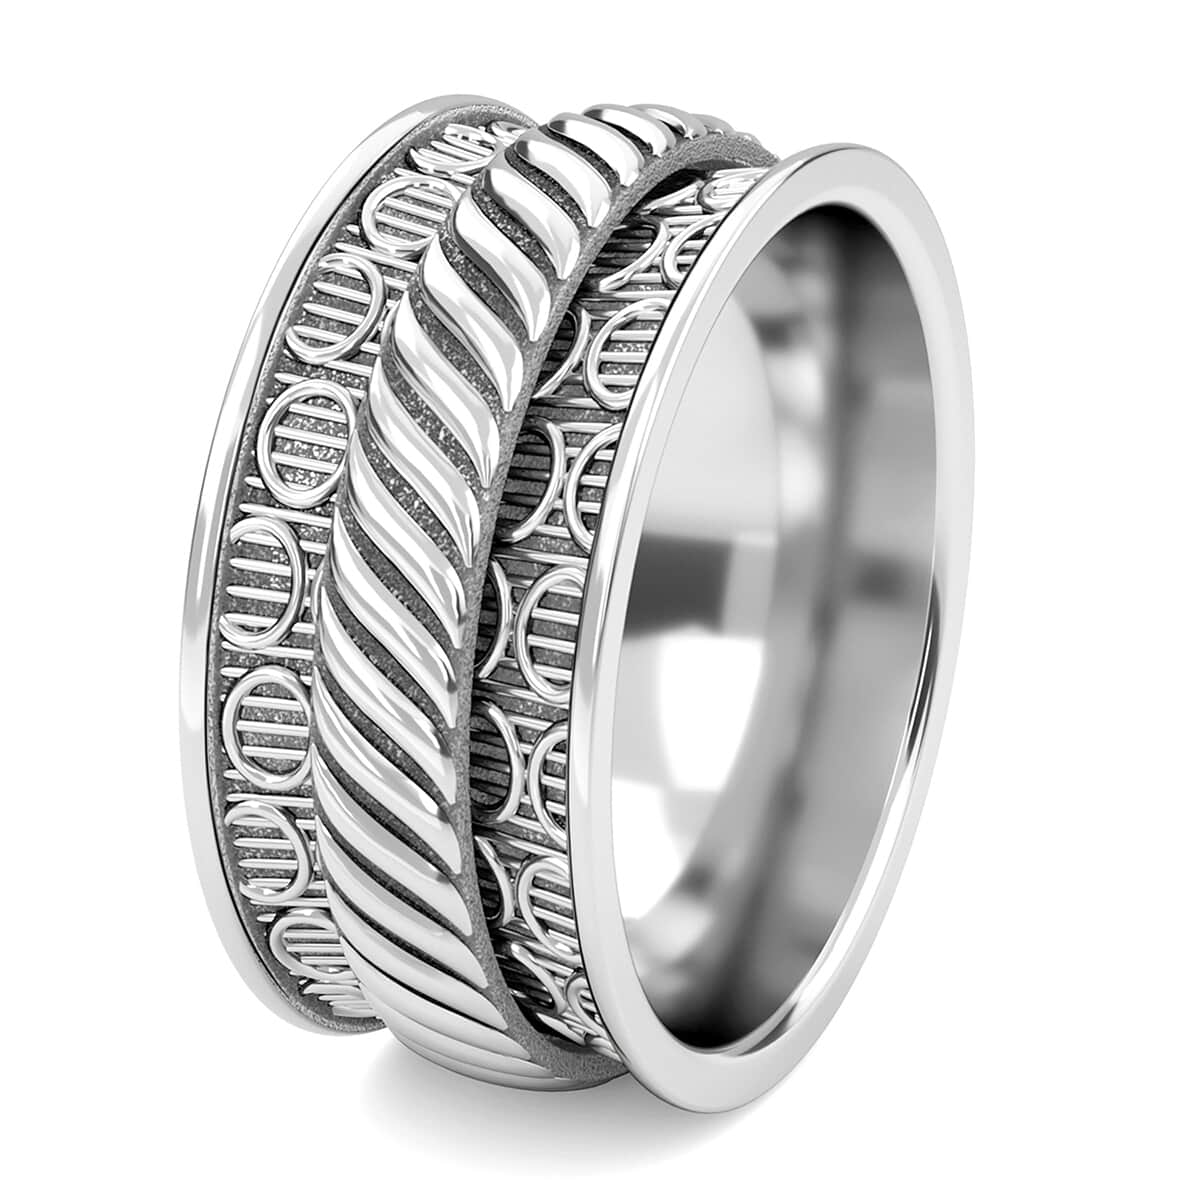 Sterling Silver Spinner Ring, Anxiety Ring for Women, Fidget Rings for Anxiety for Women, Stress Relieving Anxiety Ring (Size 9.0) (4.75 g) image number 5